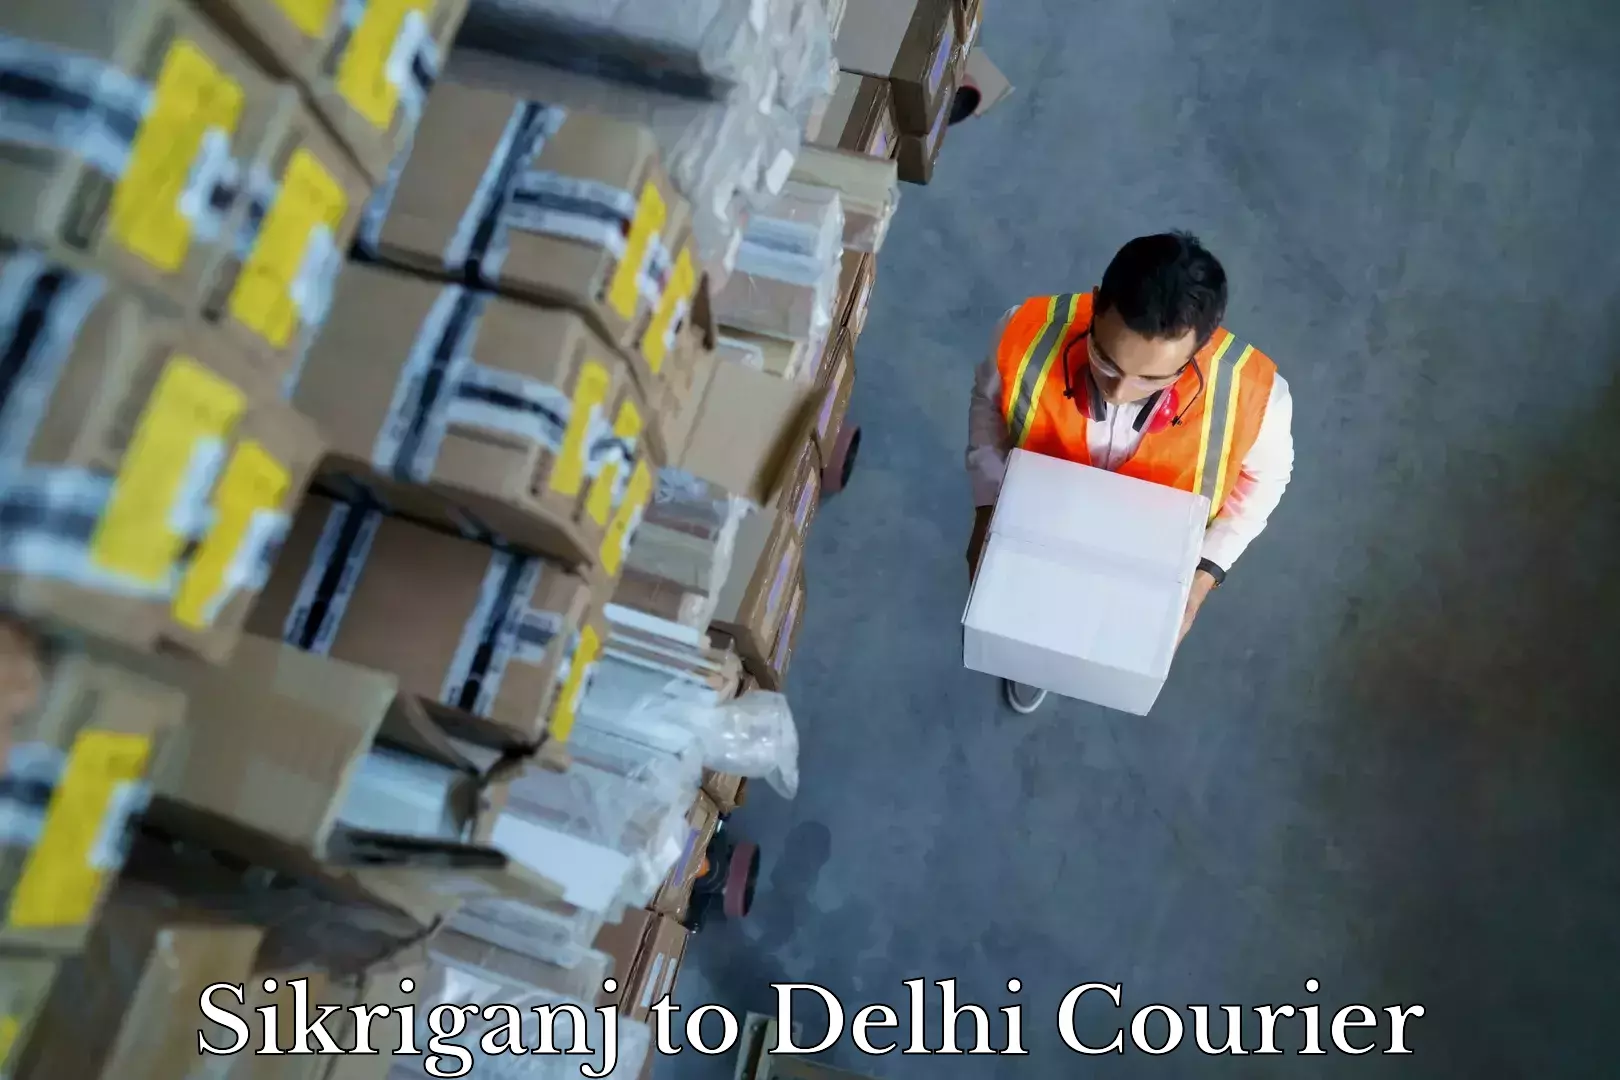 Professional relocation services Sikriganj to NCR